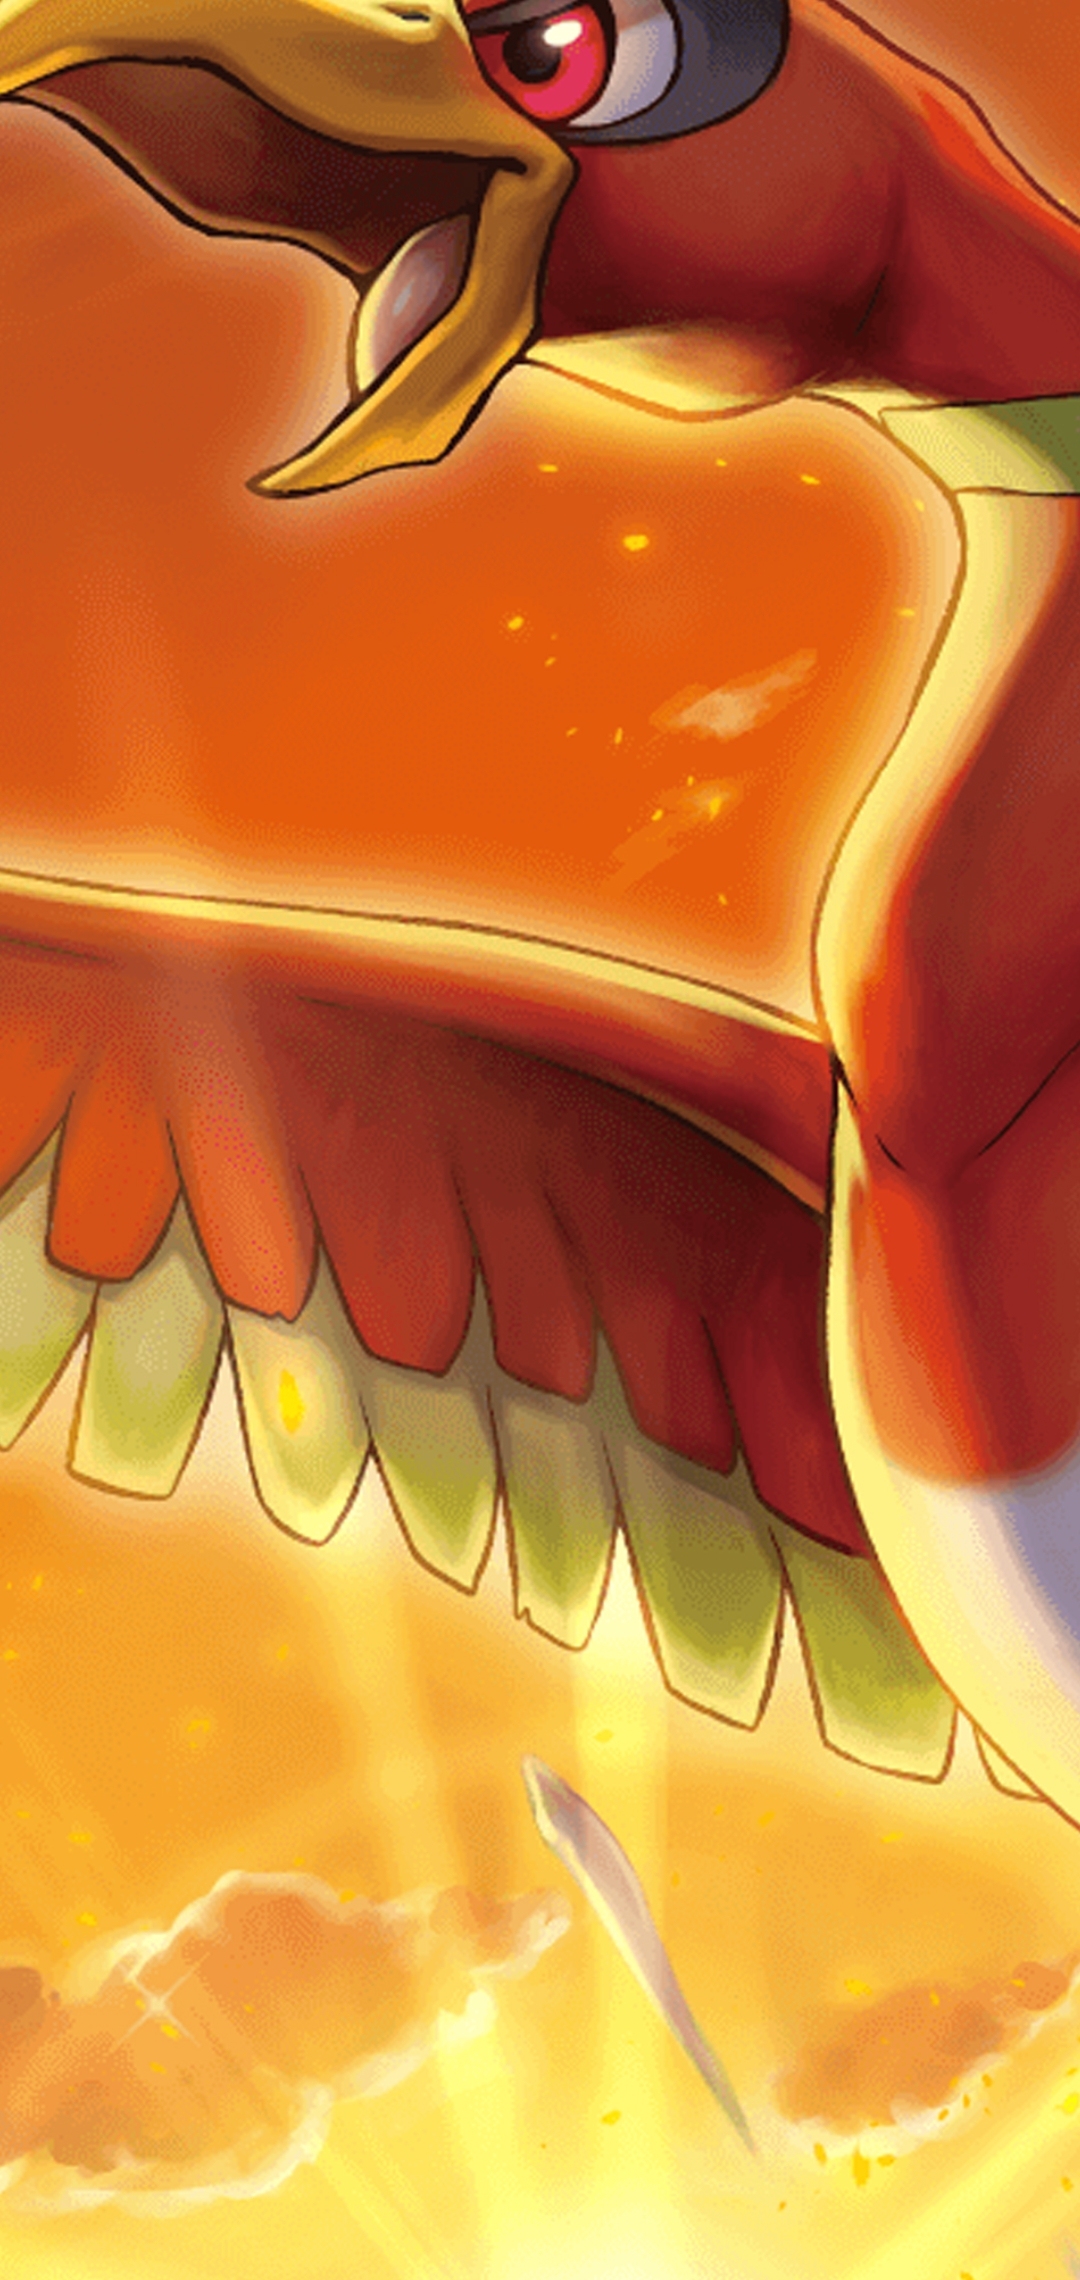 Ho-Oh Note 10 hole punch wallpaper by effuuuuuuuu on DeviantArt